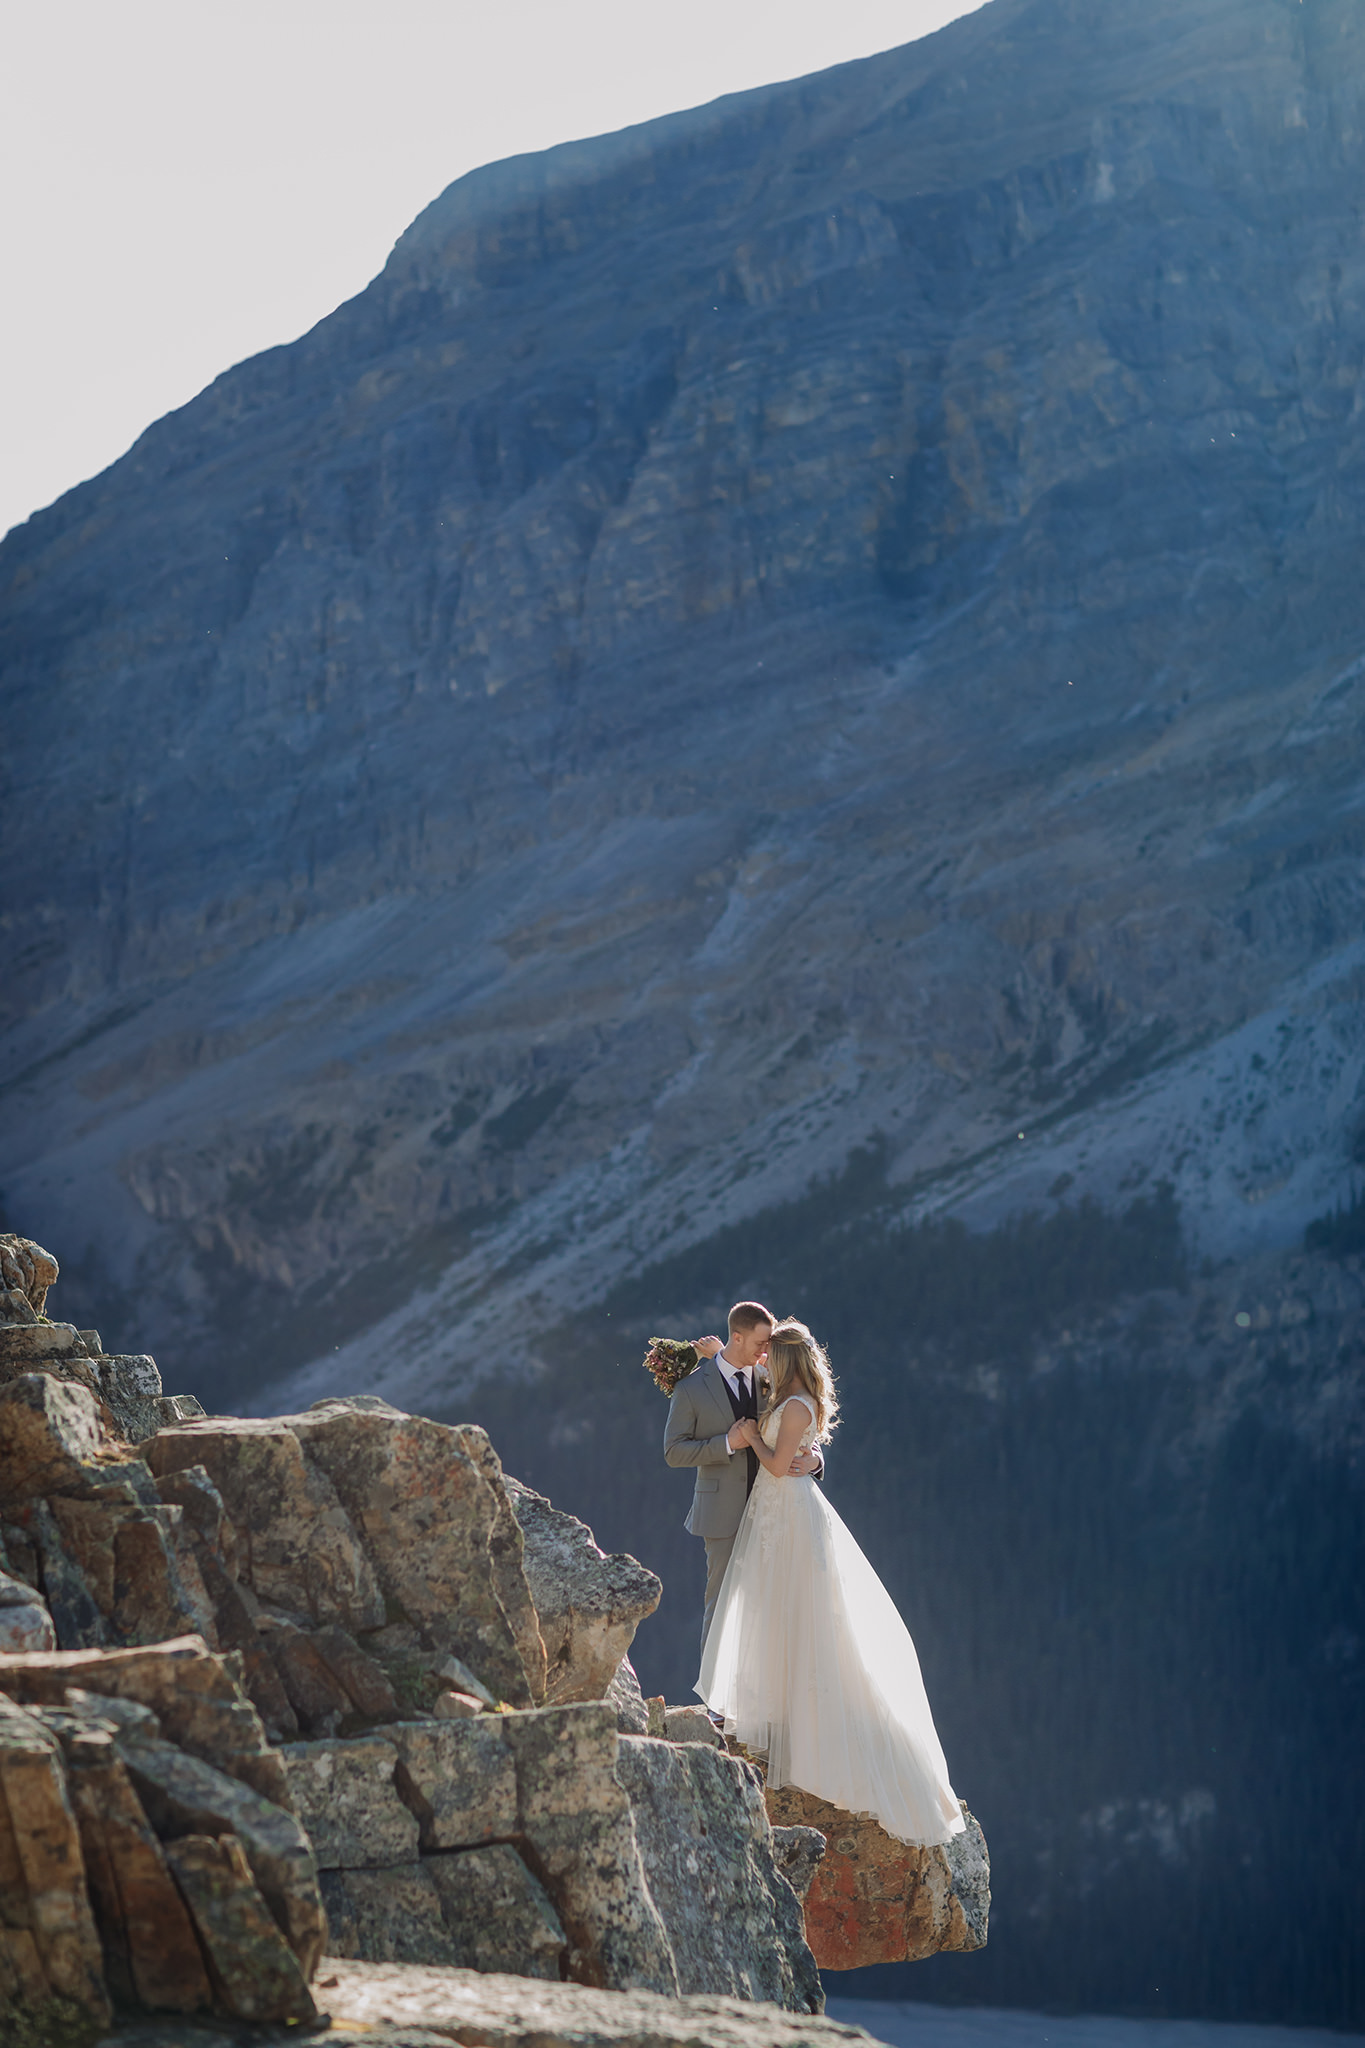 Adventuring in Banff National Park on their wedding day. Summer mountain elopement at Peyto Lake photographed by local wedding & elopement photographer ENV Photography